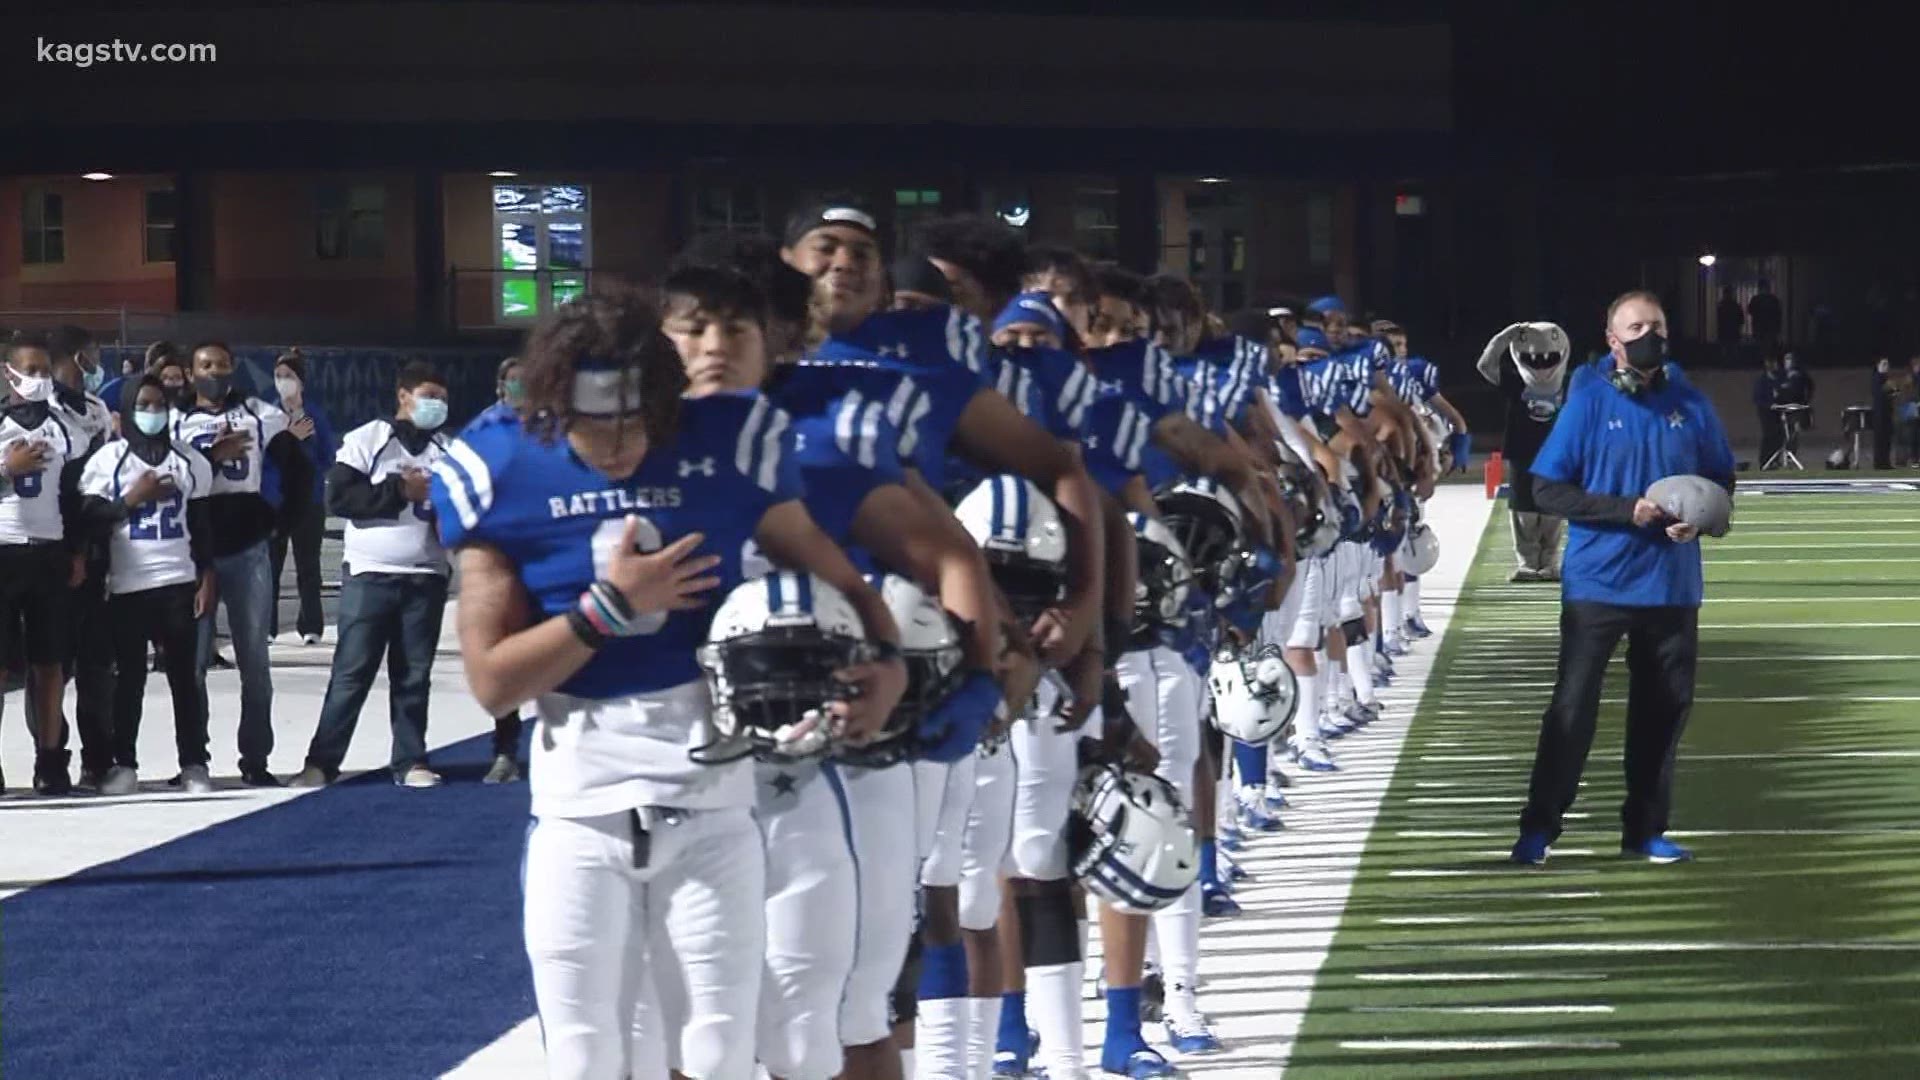 Here are six highlights from Thursday night Bi-District round playoff action. Navasota, Franklin, Buffalo, Leon, and Calvert all earned wins.